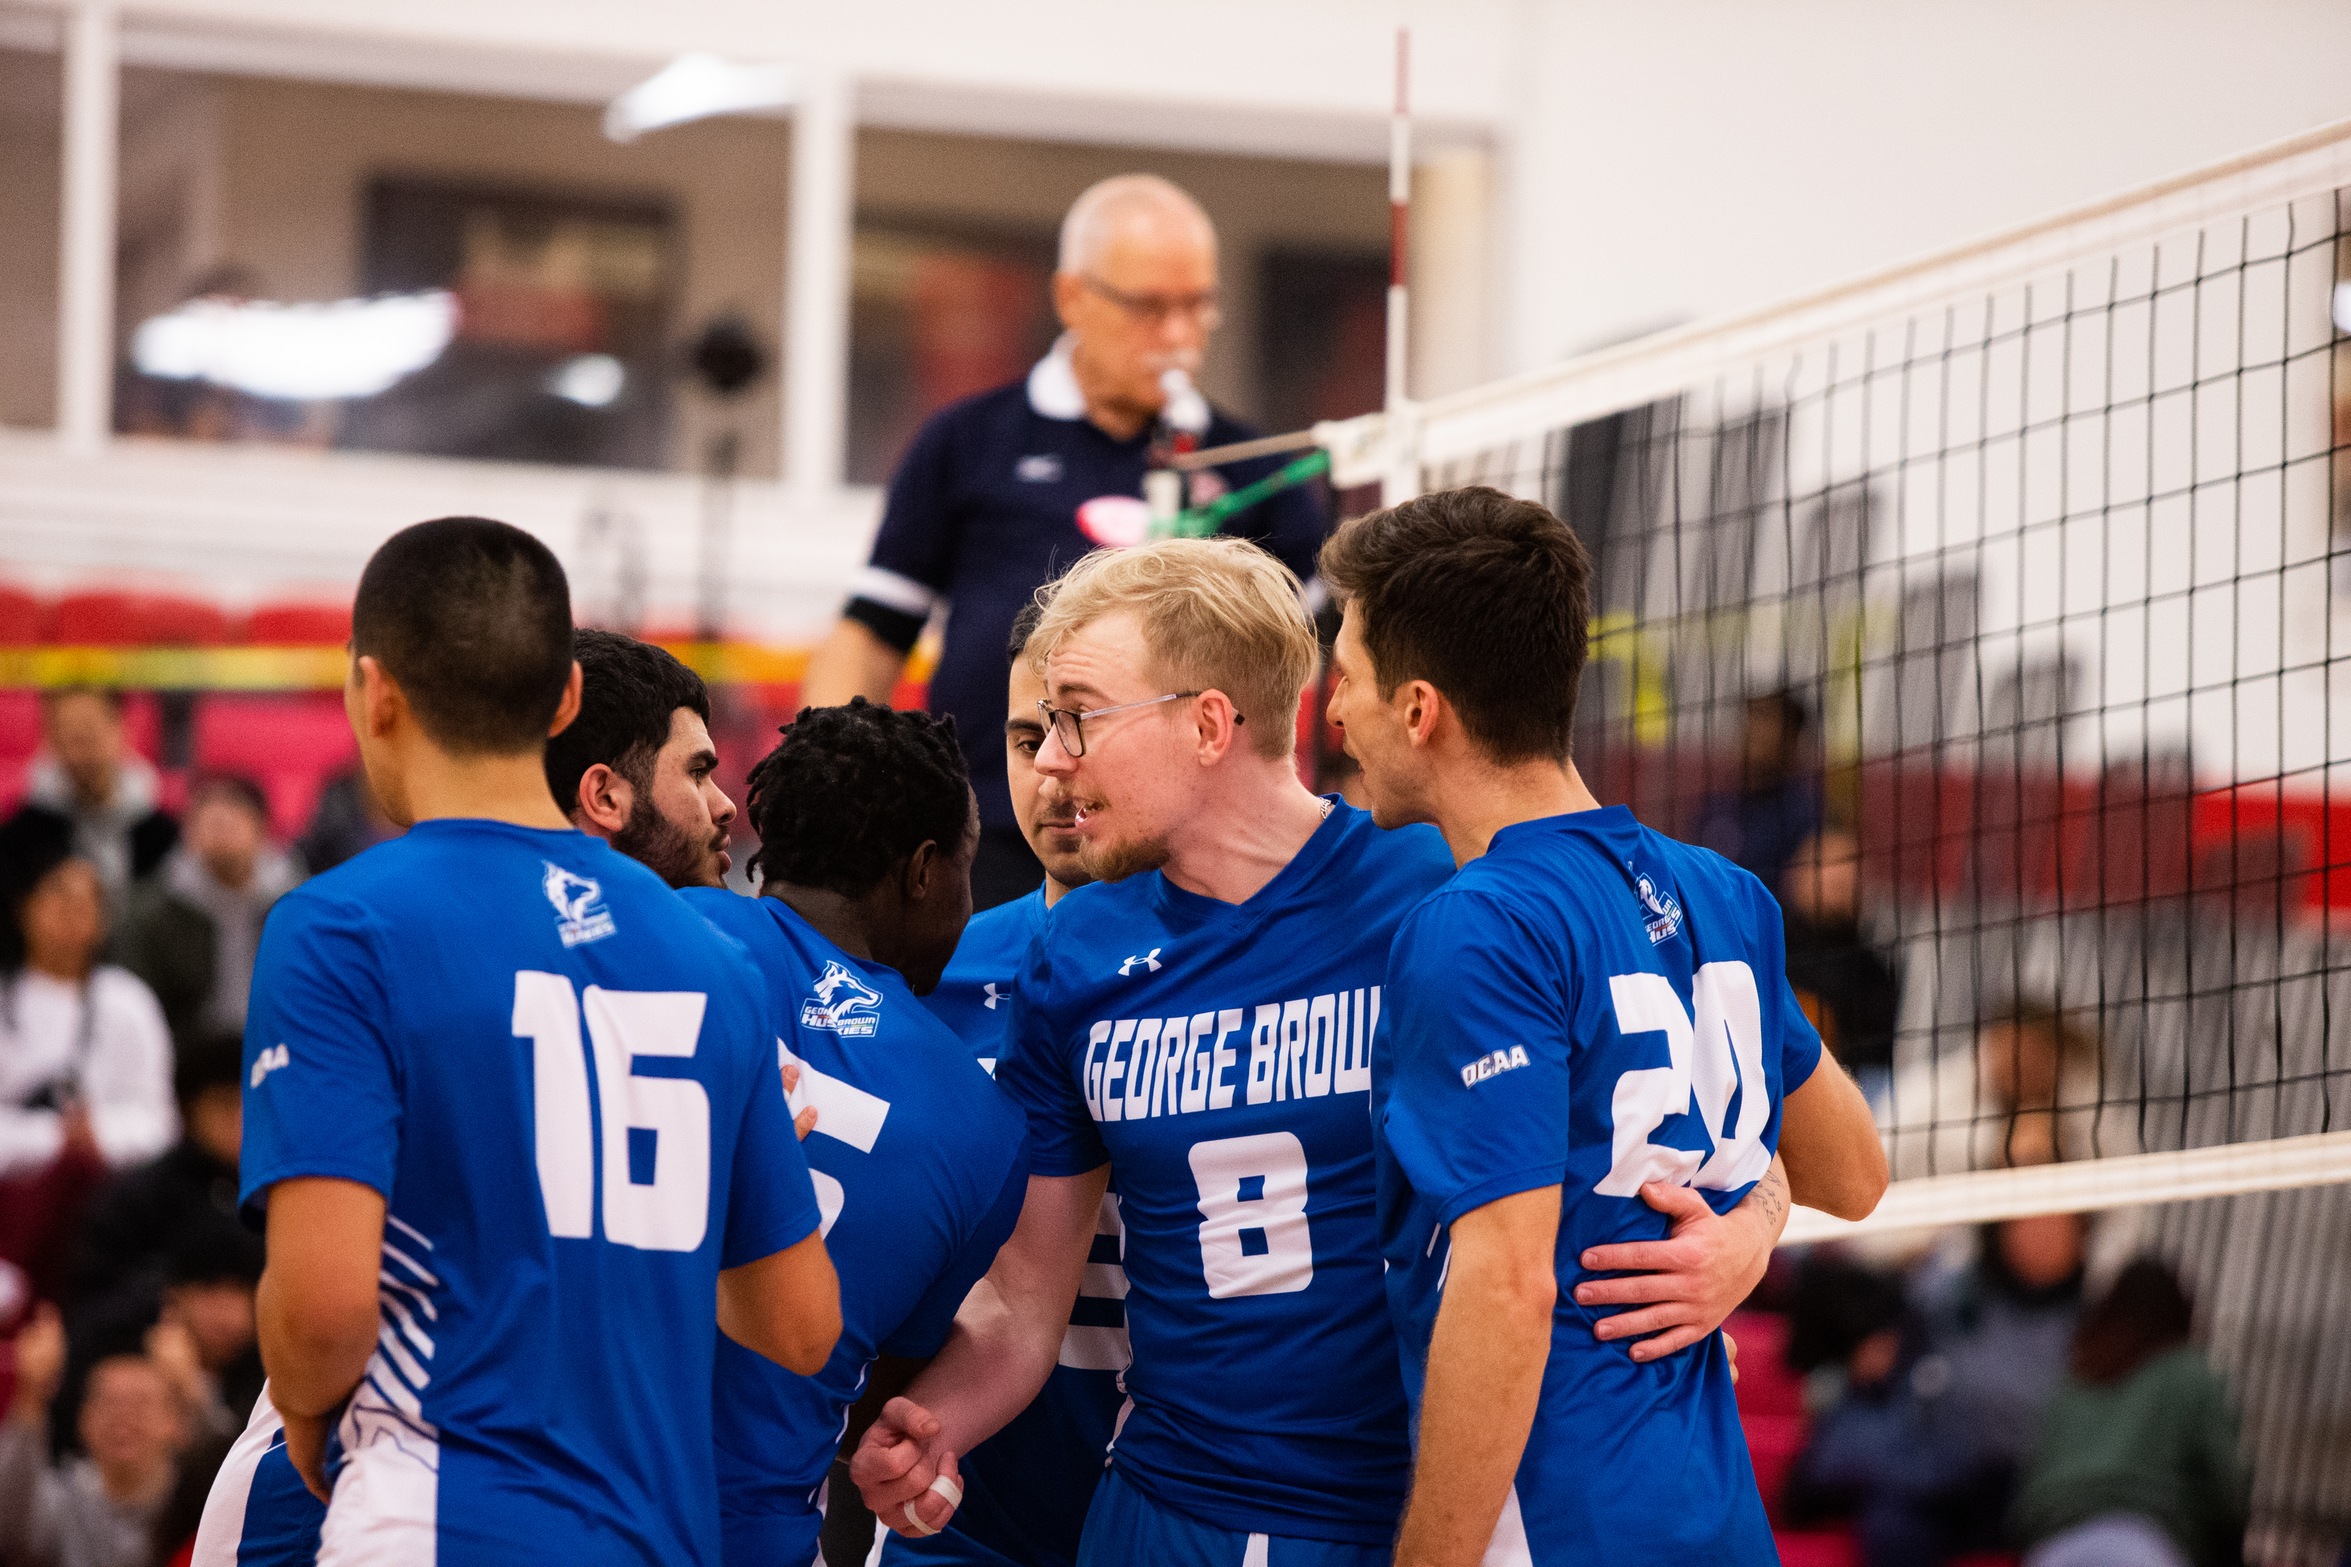 HUSKIES MEN'S VOLLEYBALL FALL TO STING